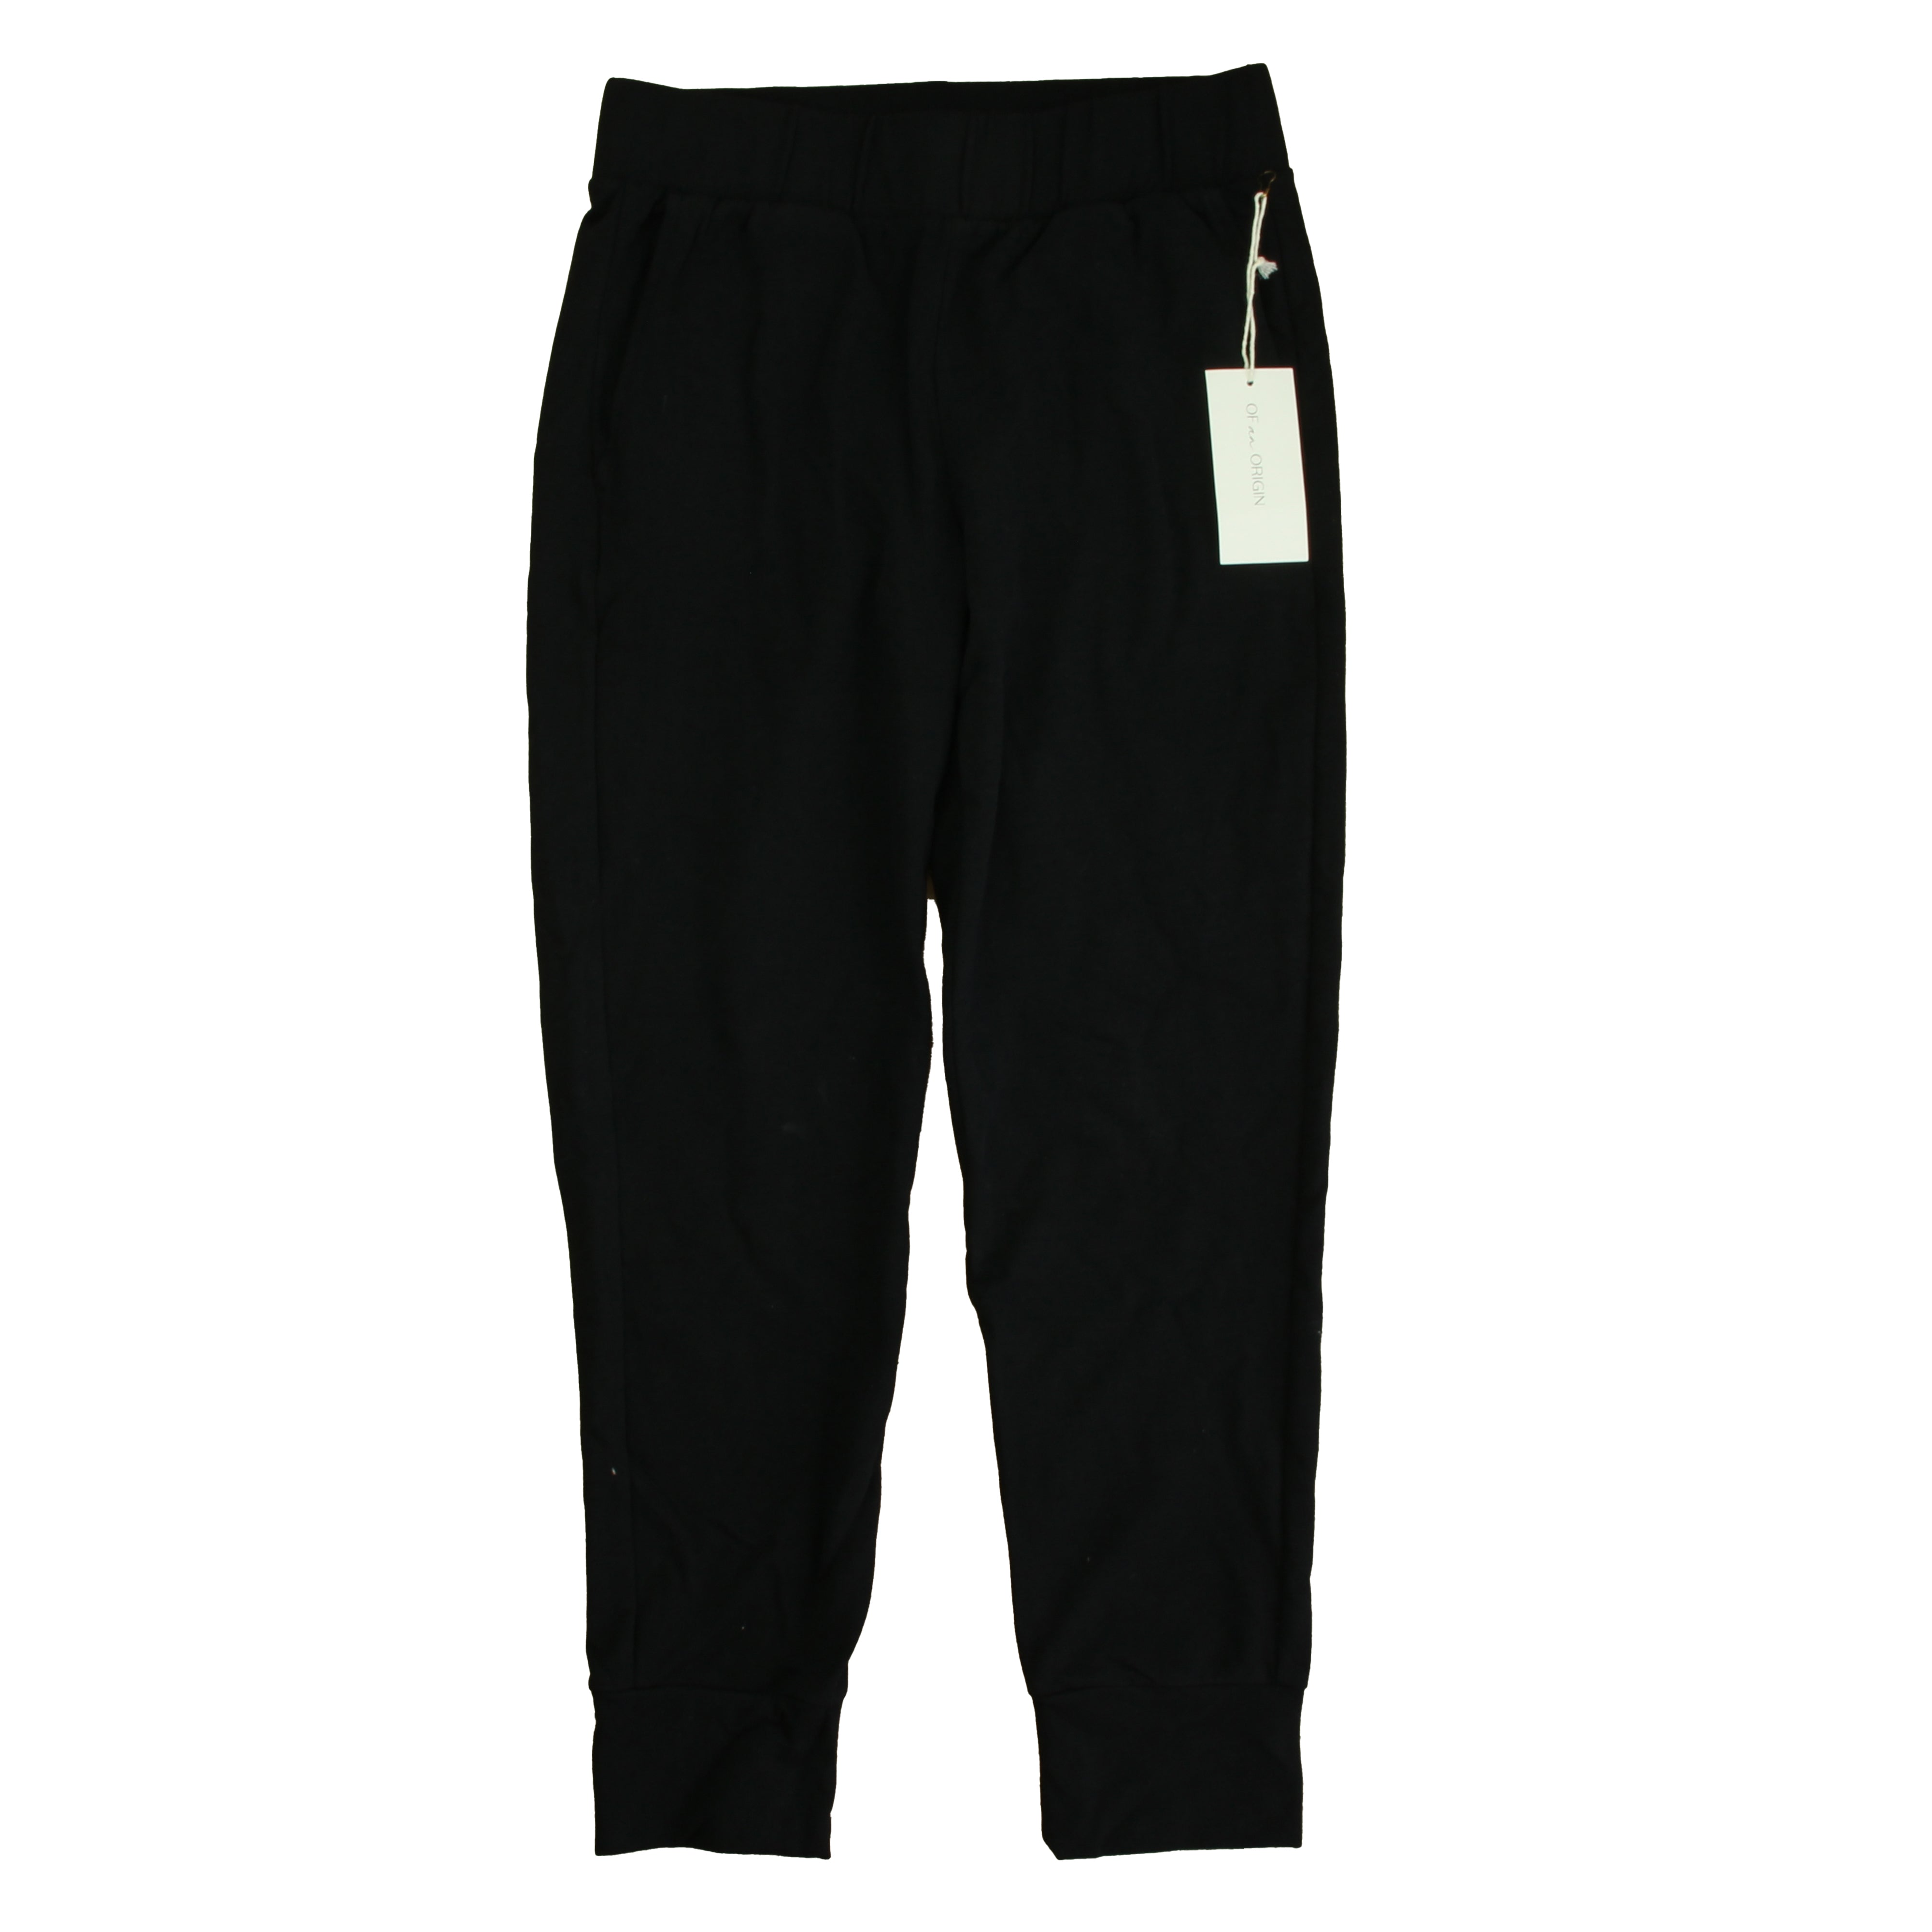 Pre-owned Black Pants size: Adult XS-XL